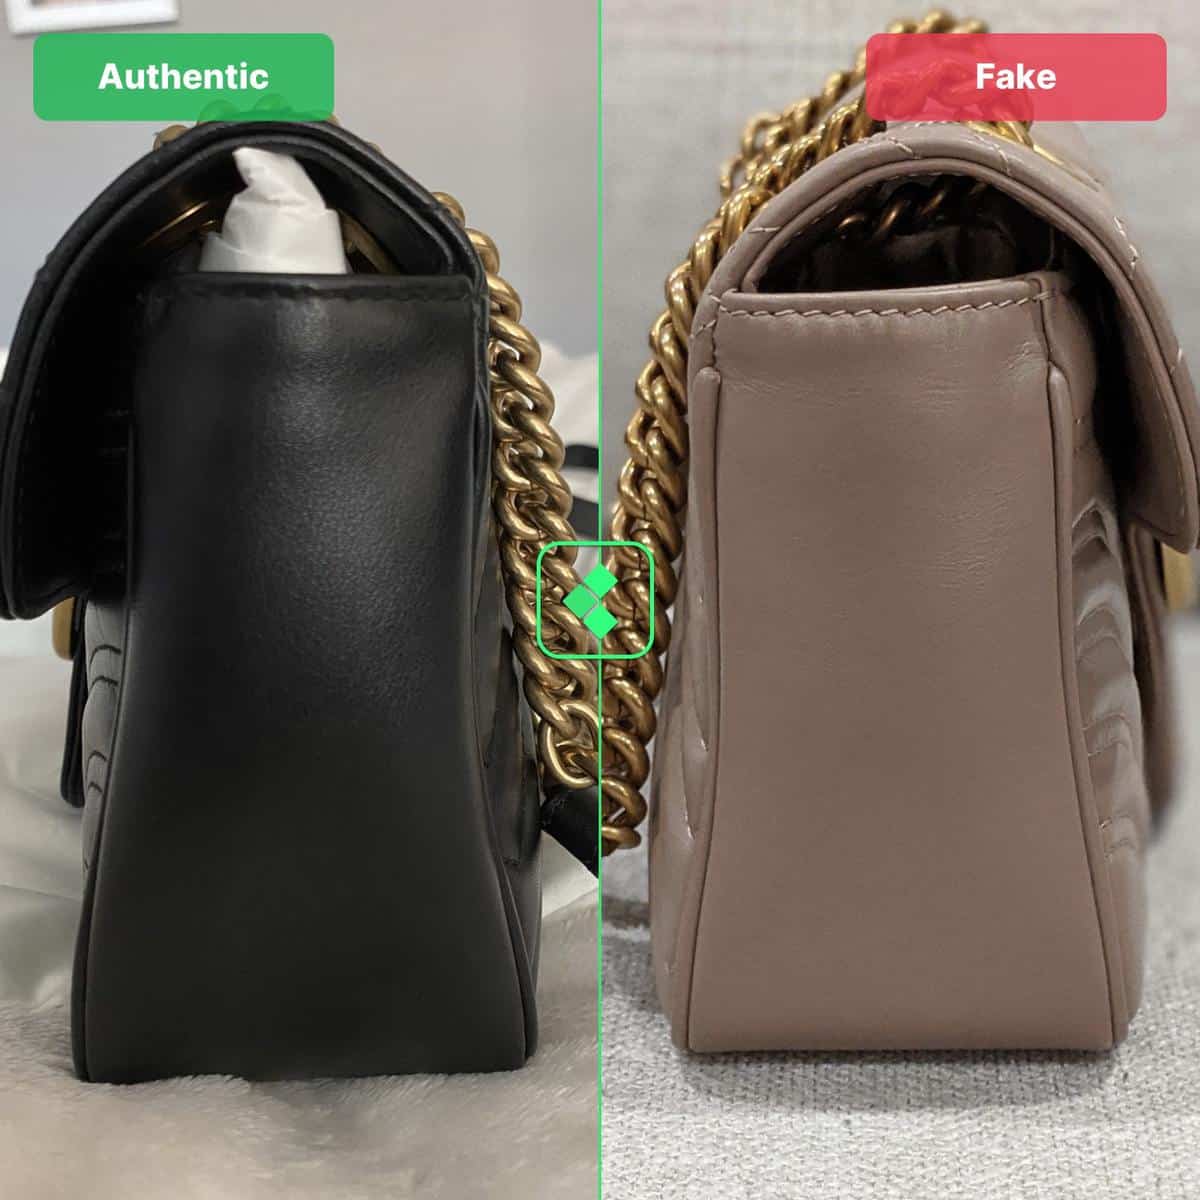 How to Authenticate the Gucci Marmont Handbag - Academy by